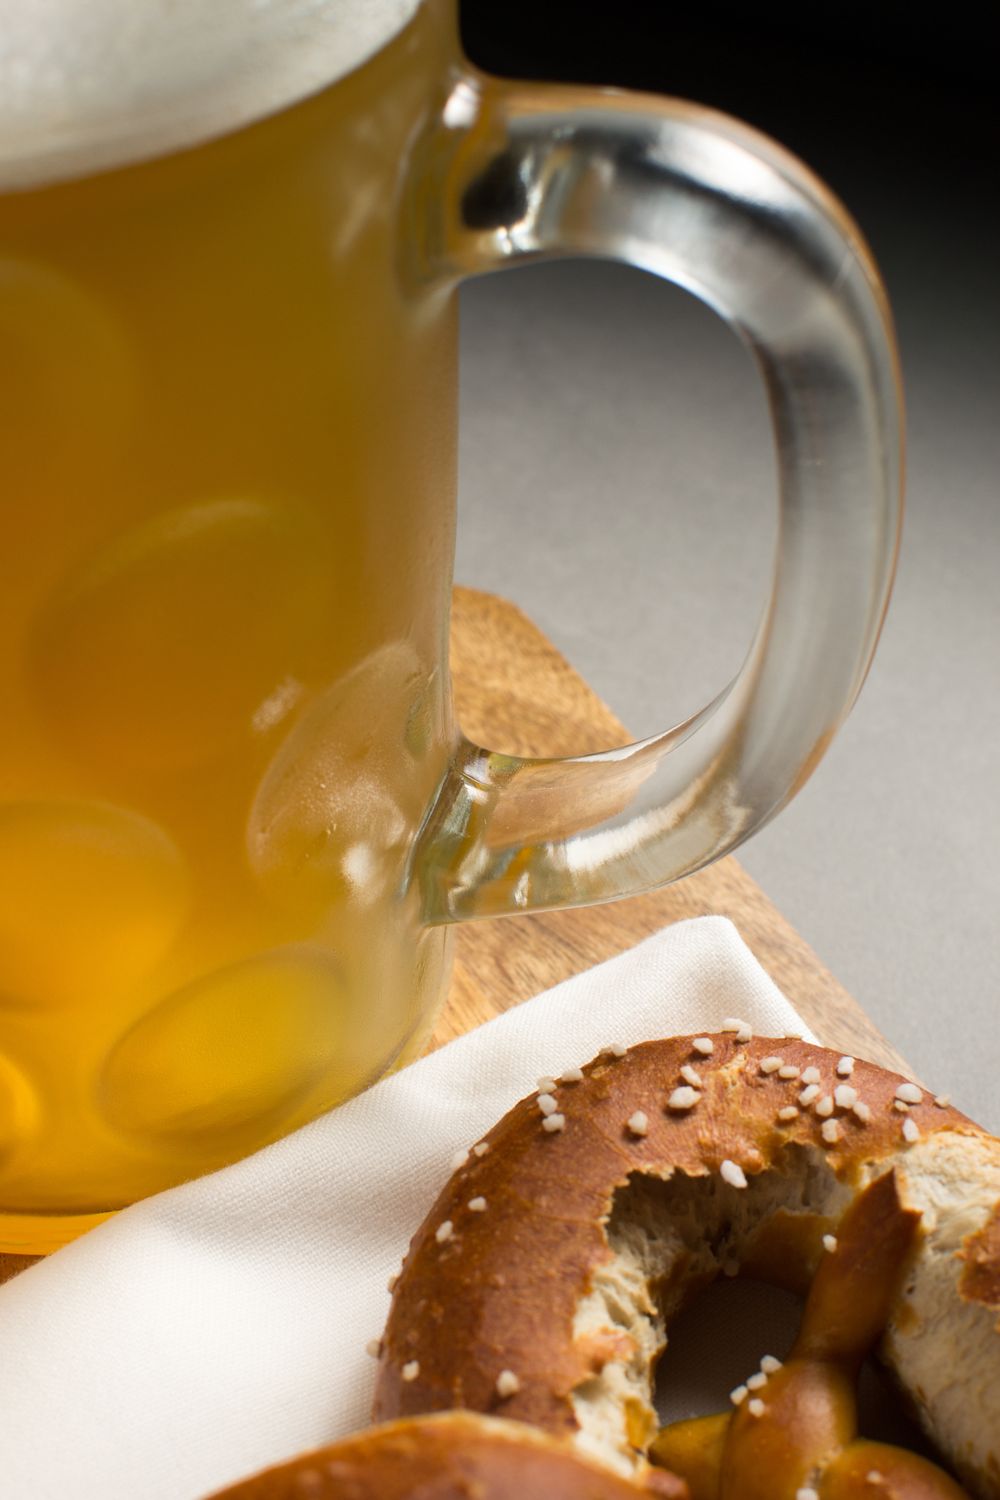 Beer and pretzels make an irresistable combination. Photo: Thinkstock